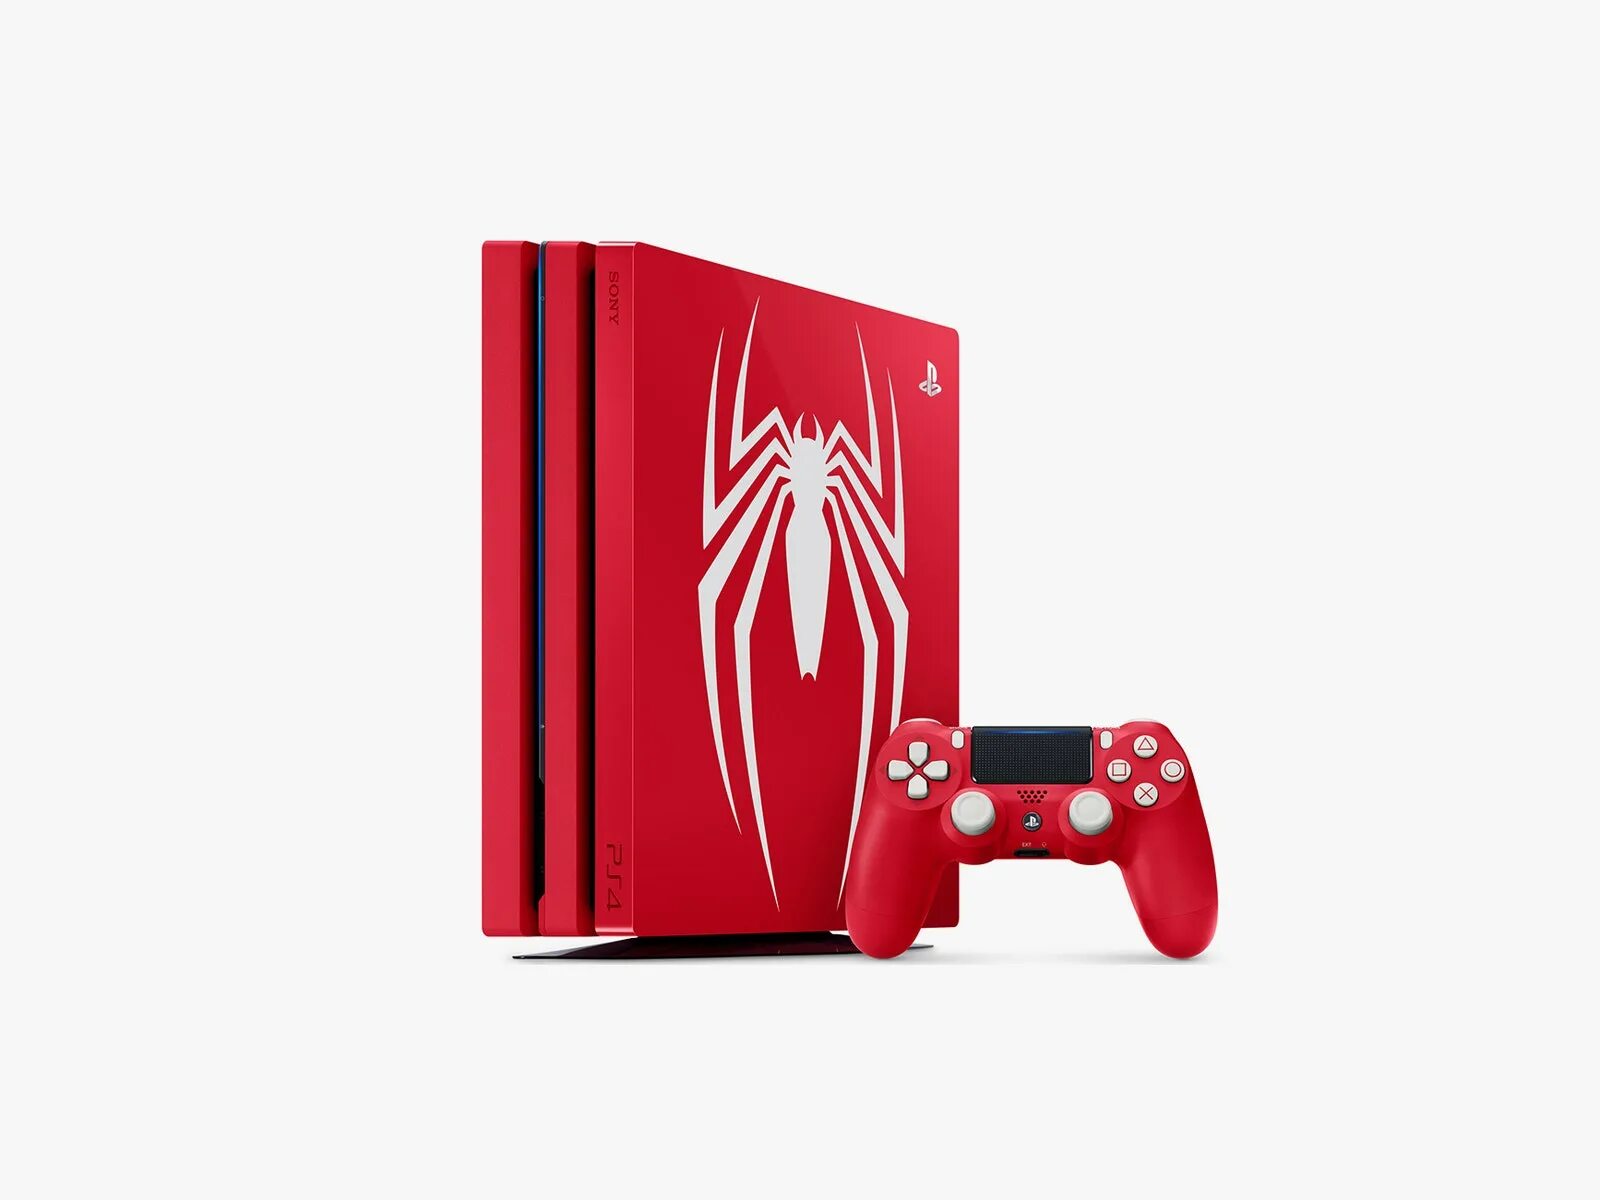 Ps4 Spider man Limited Edition. Ps4 Pro 1tb. Ps4 Slim Spider man Edition. Ps4 Pro Spider man. Паук на плейстейшен 4